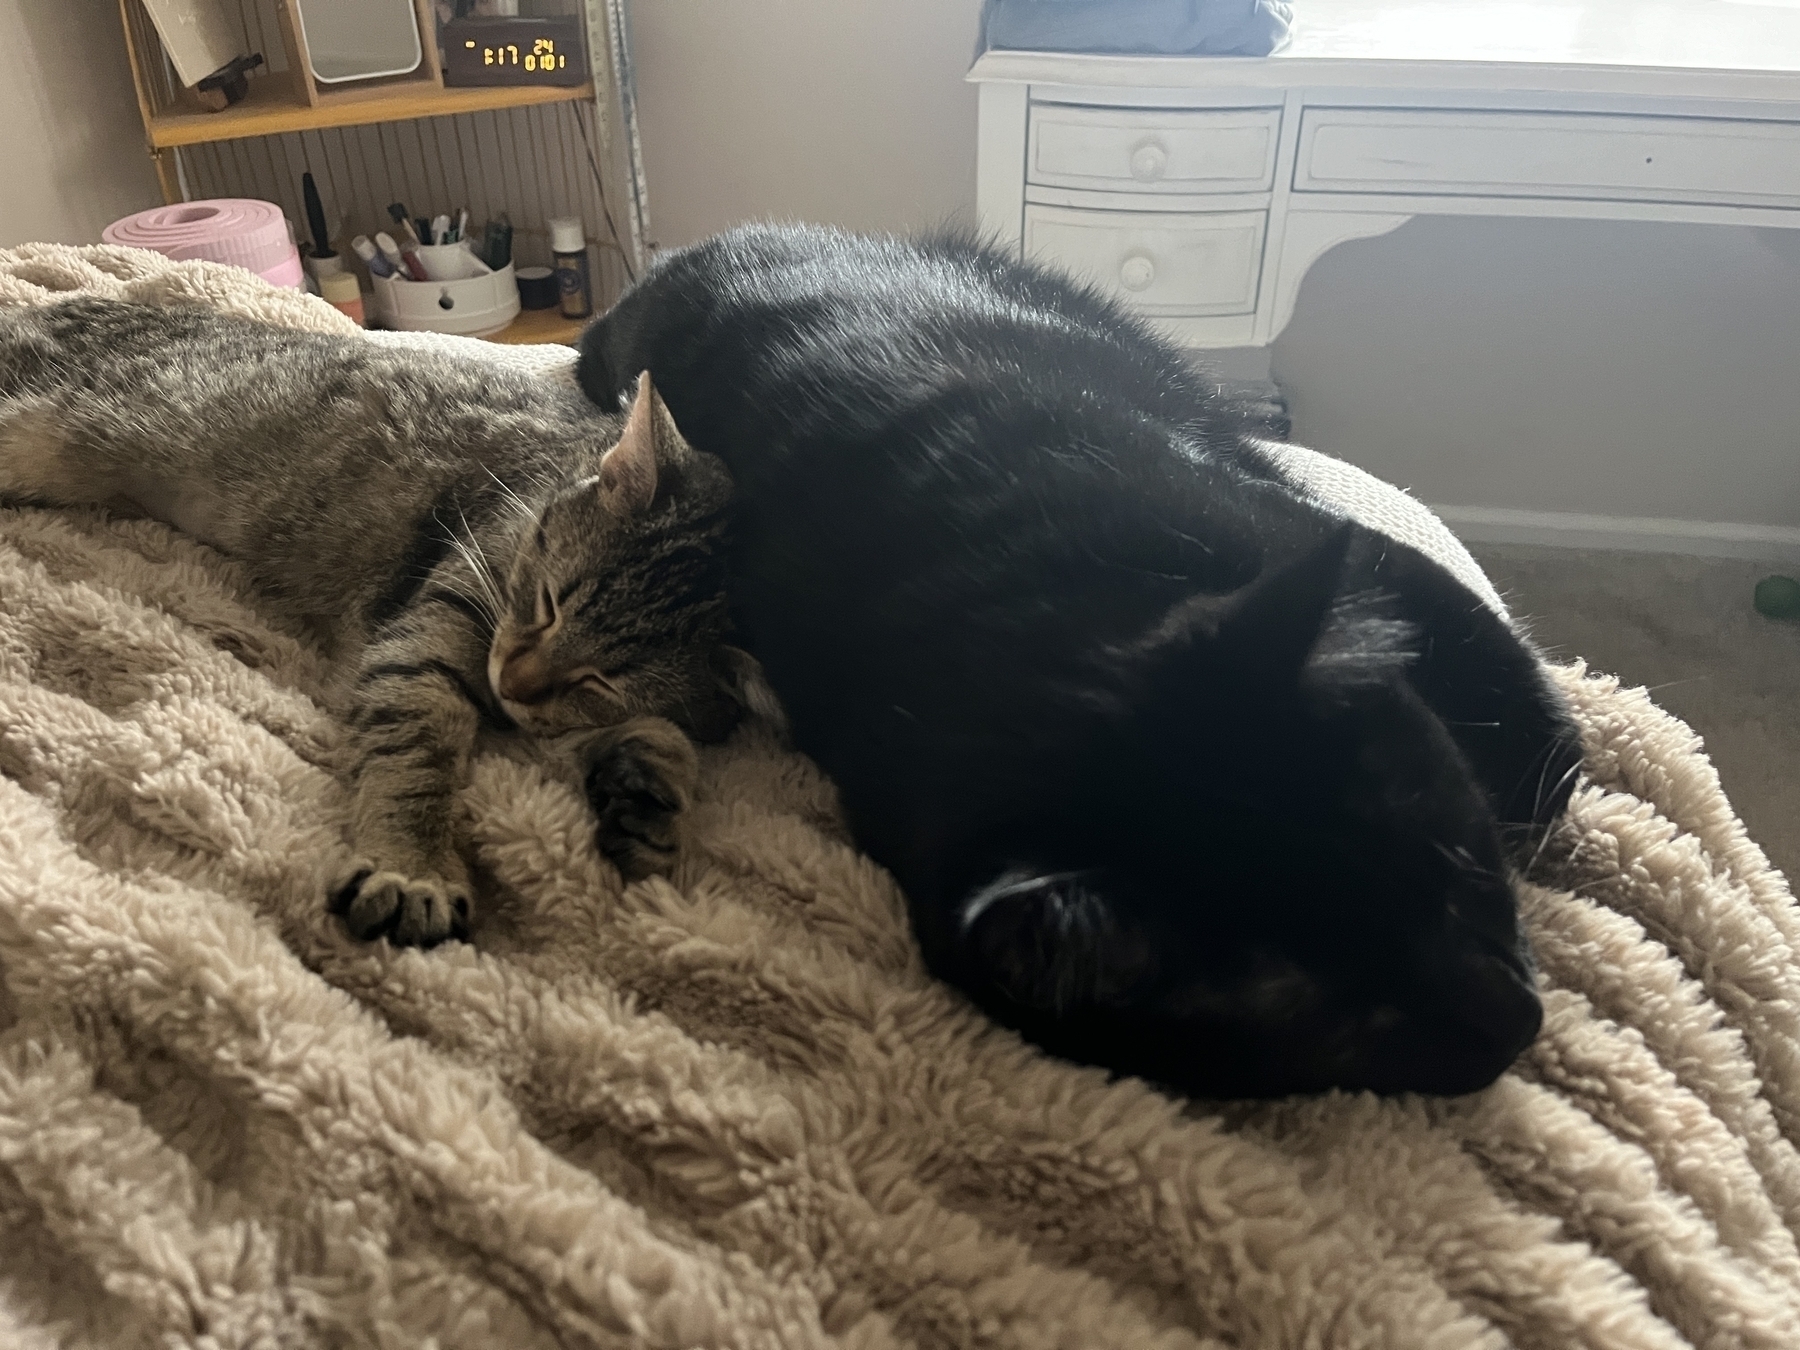 Two cats napping on a bed, one small gray tabby and one big black cat. 